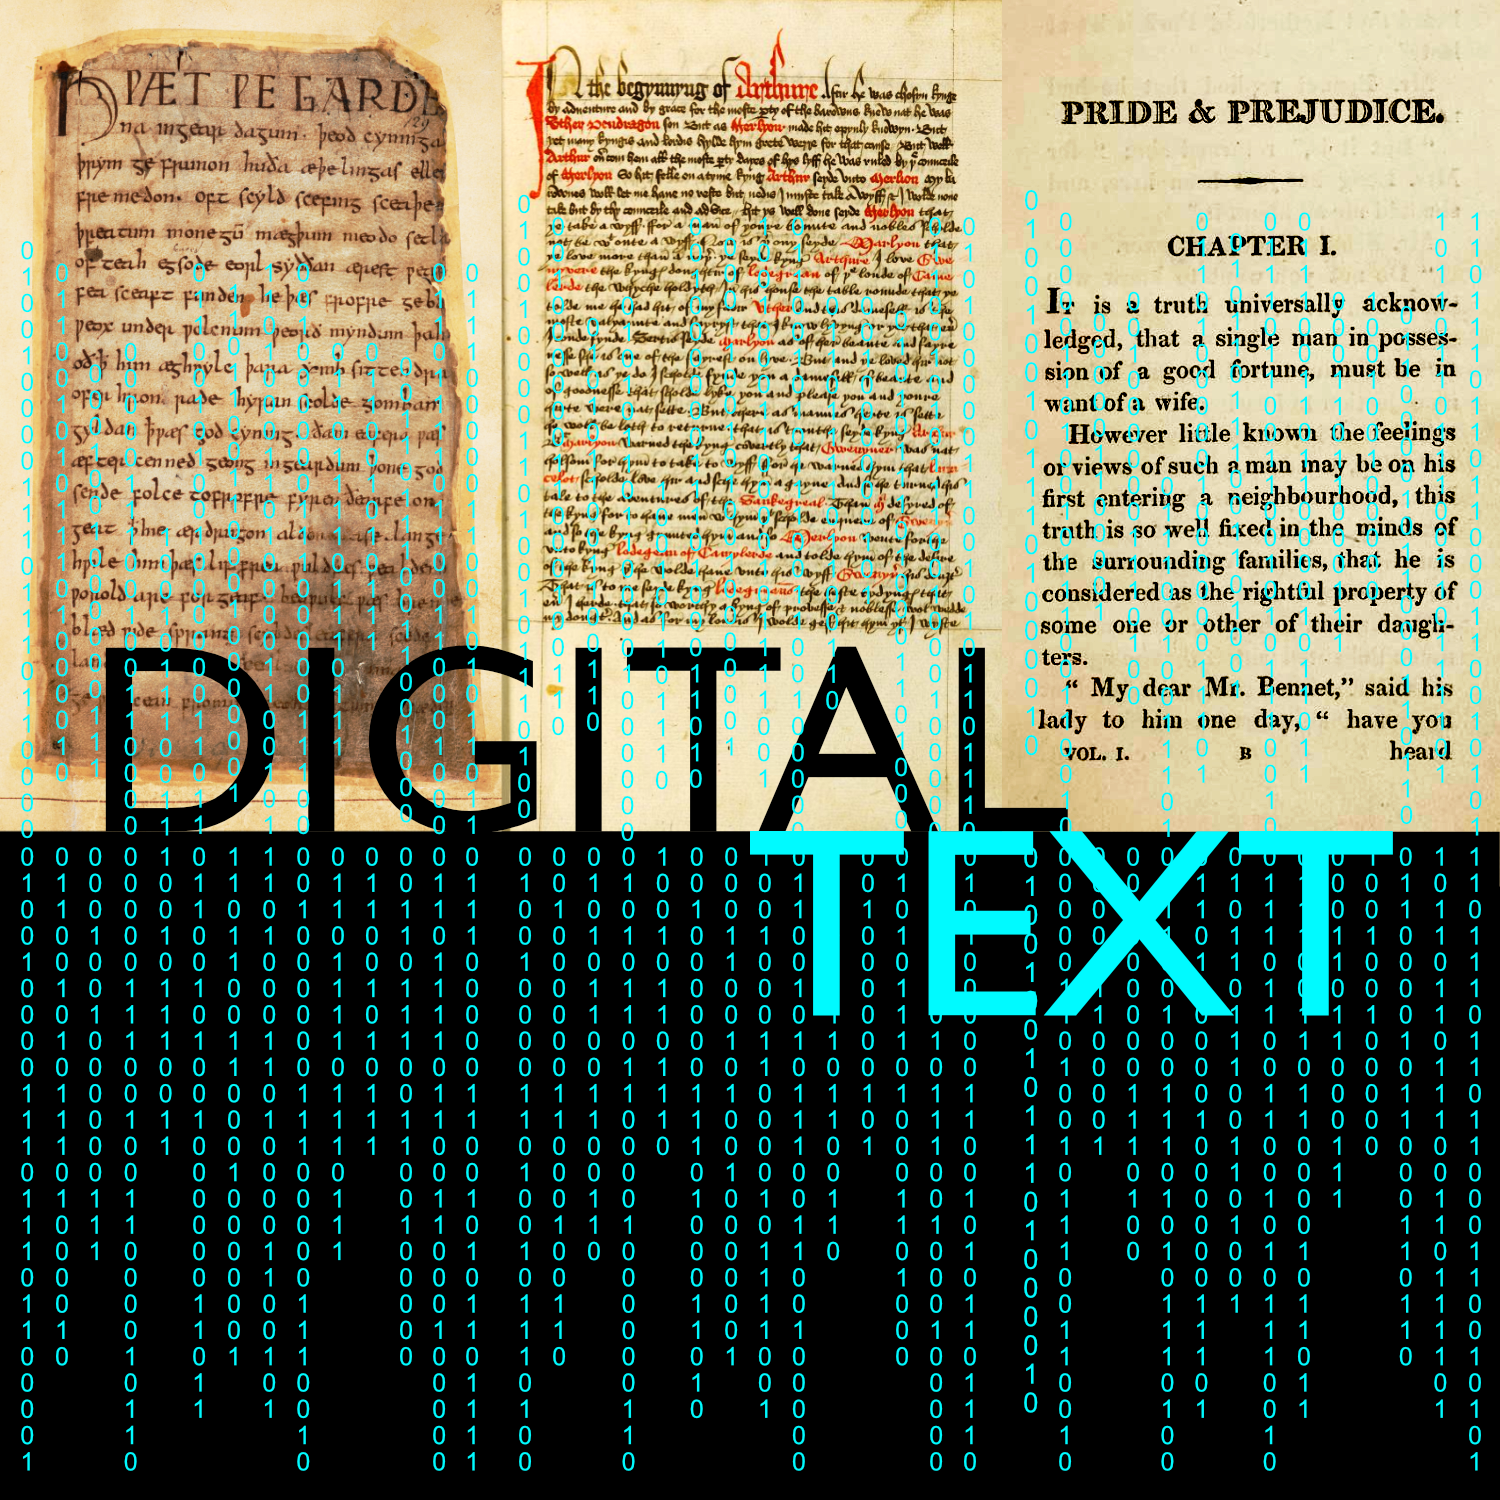 Mining through the Margins: Introducing Digital Text for Summer 2022 